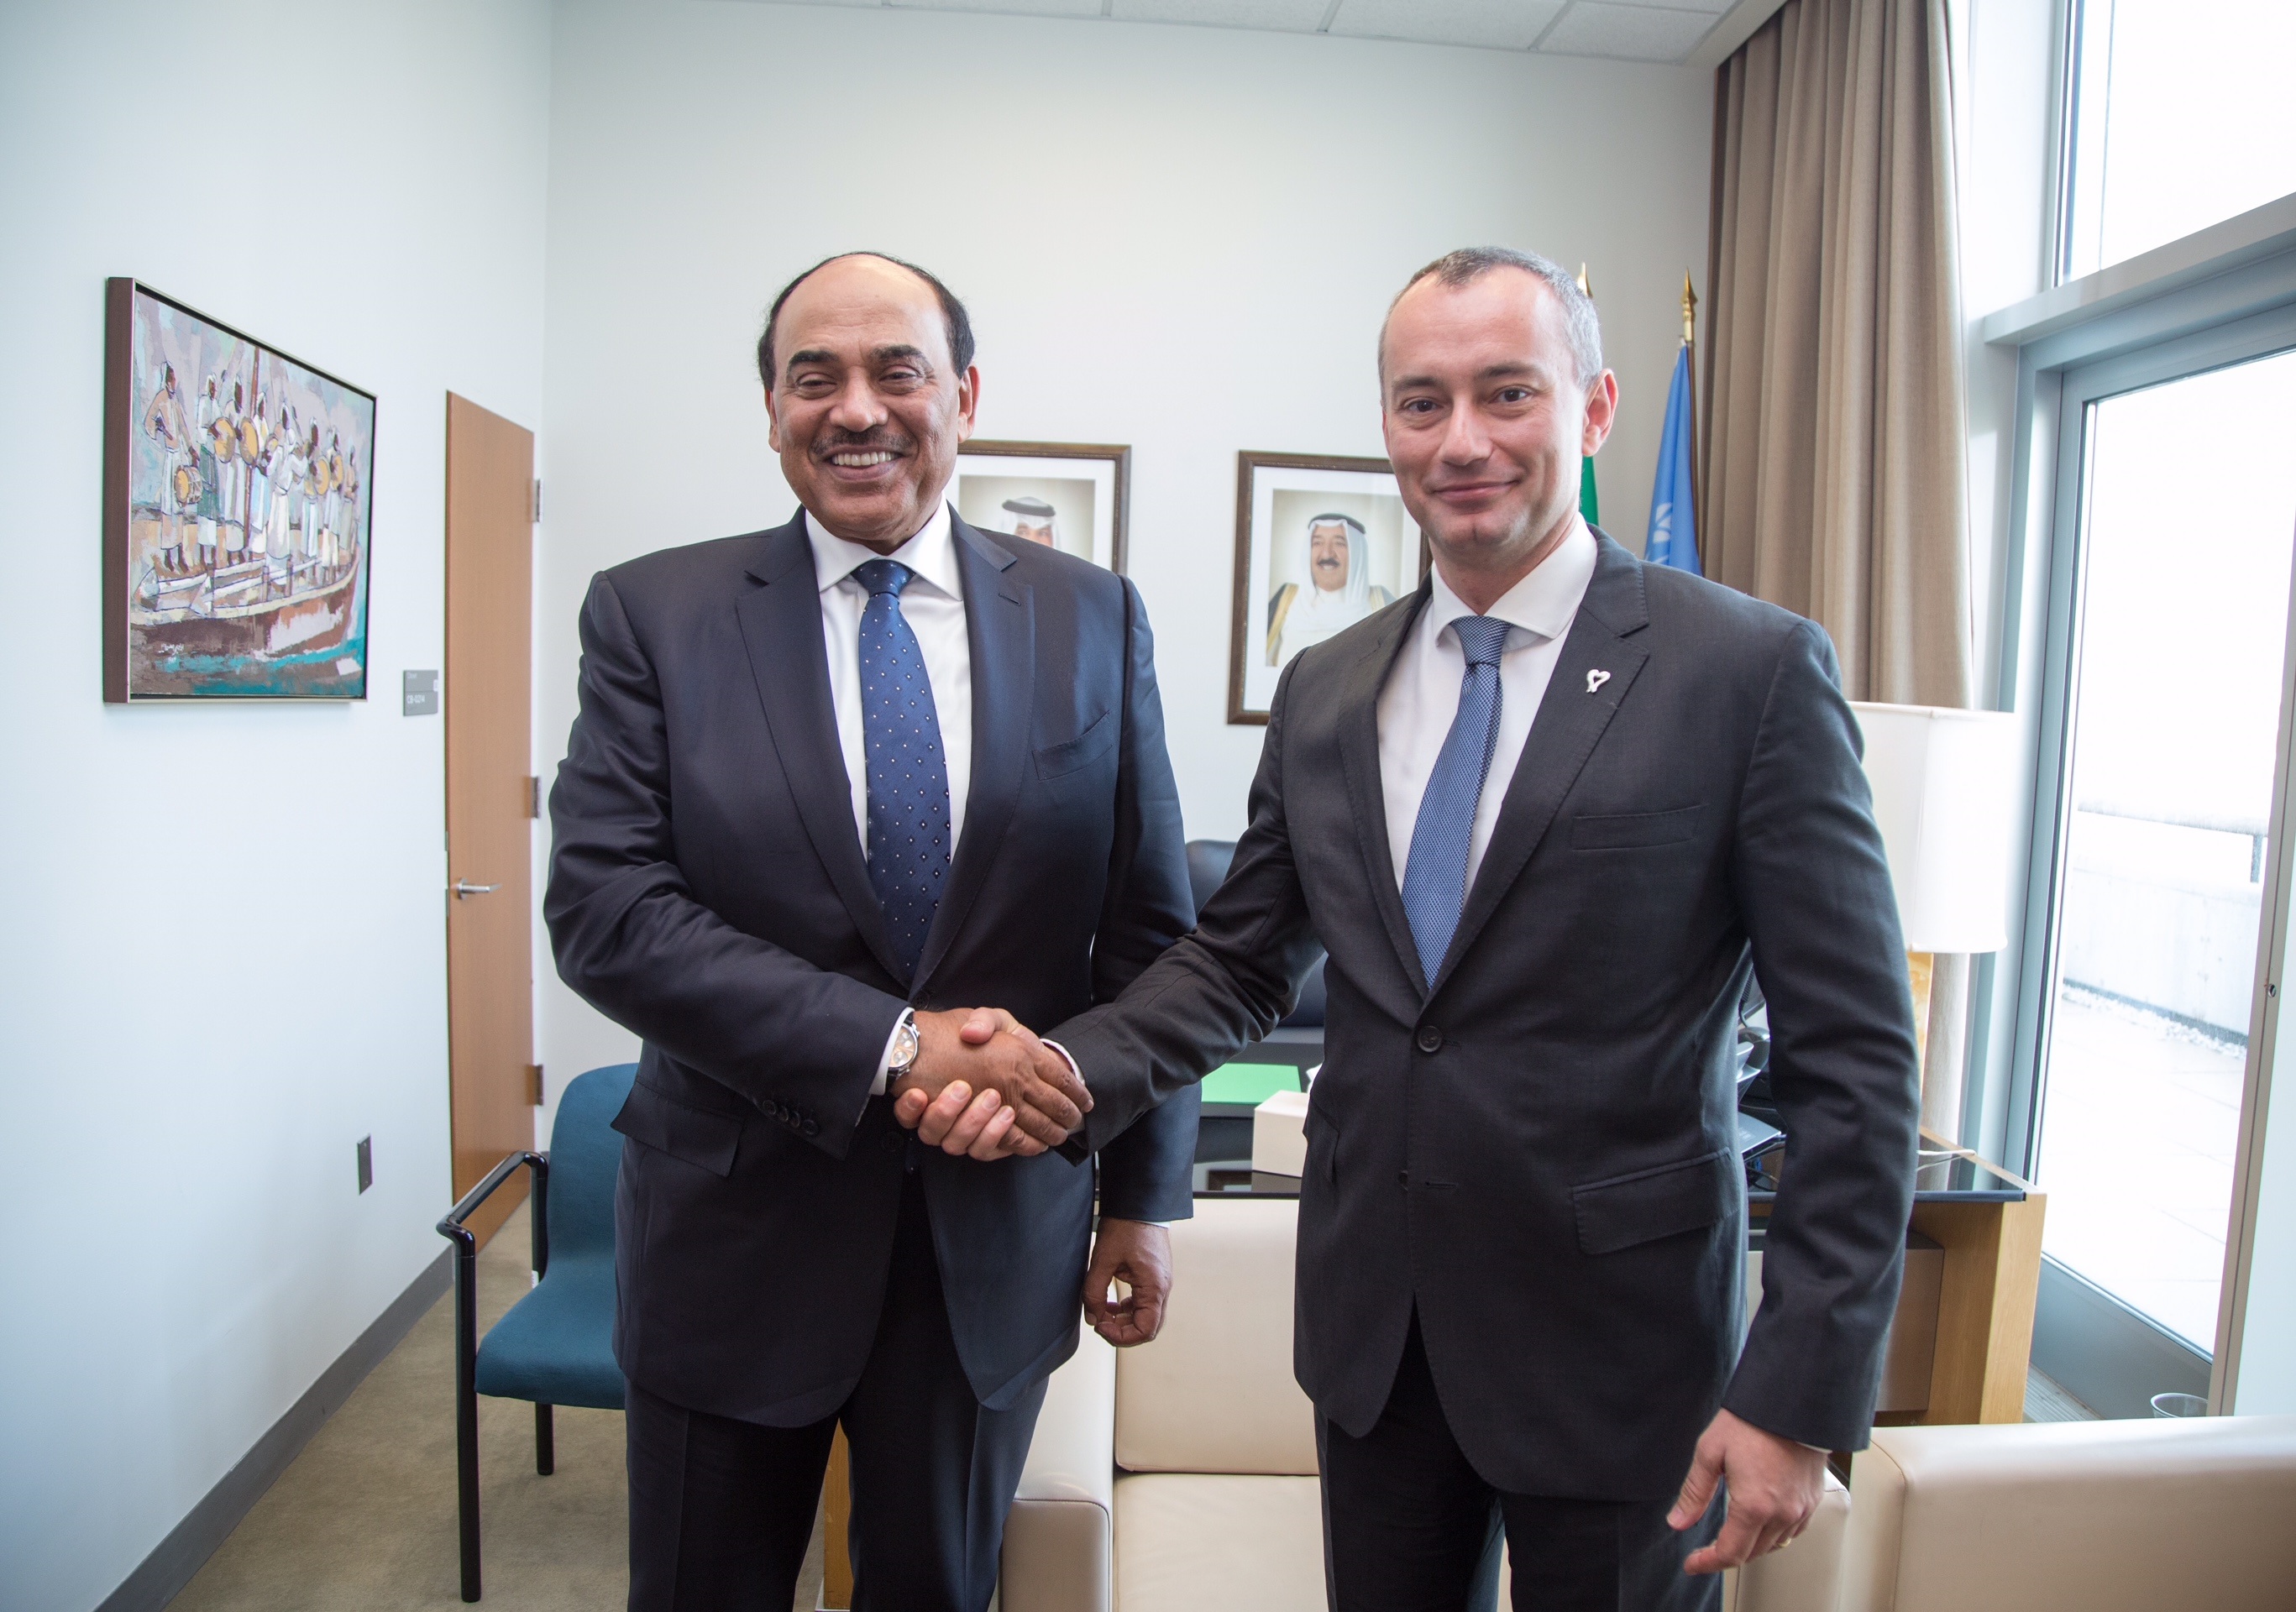 Deputy Prime Minister and Minister of Foreign Affairs Sheikh Sabah Khaled Al-Hamad Al-Sabah received the UN Special Coordinator for the Middle East Peace Process in New York Nikolay Mladenov